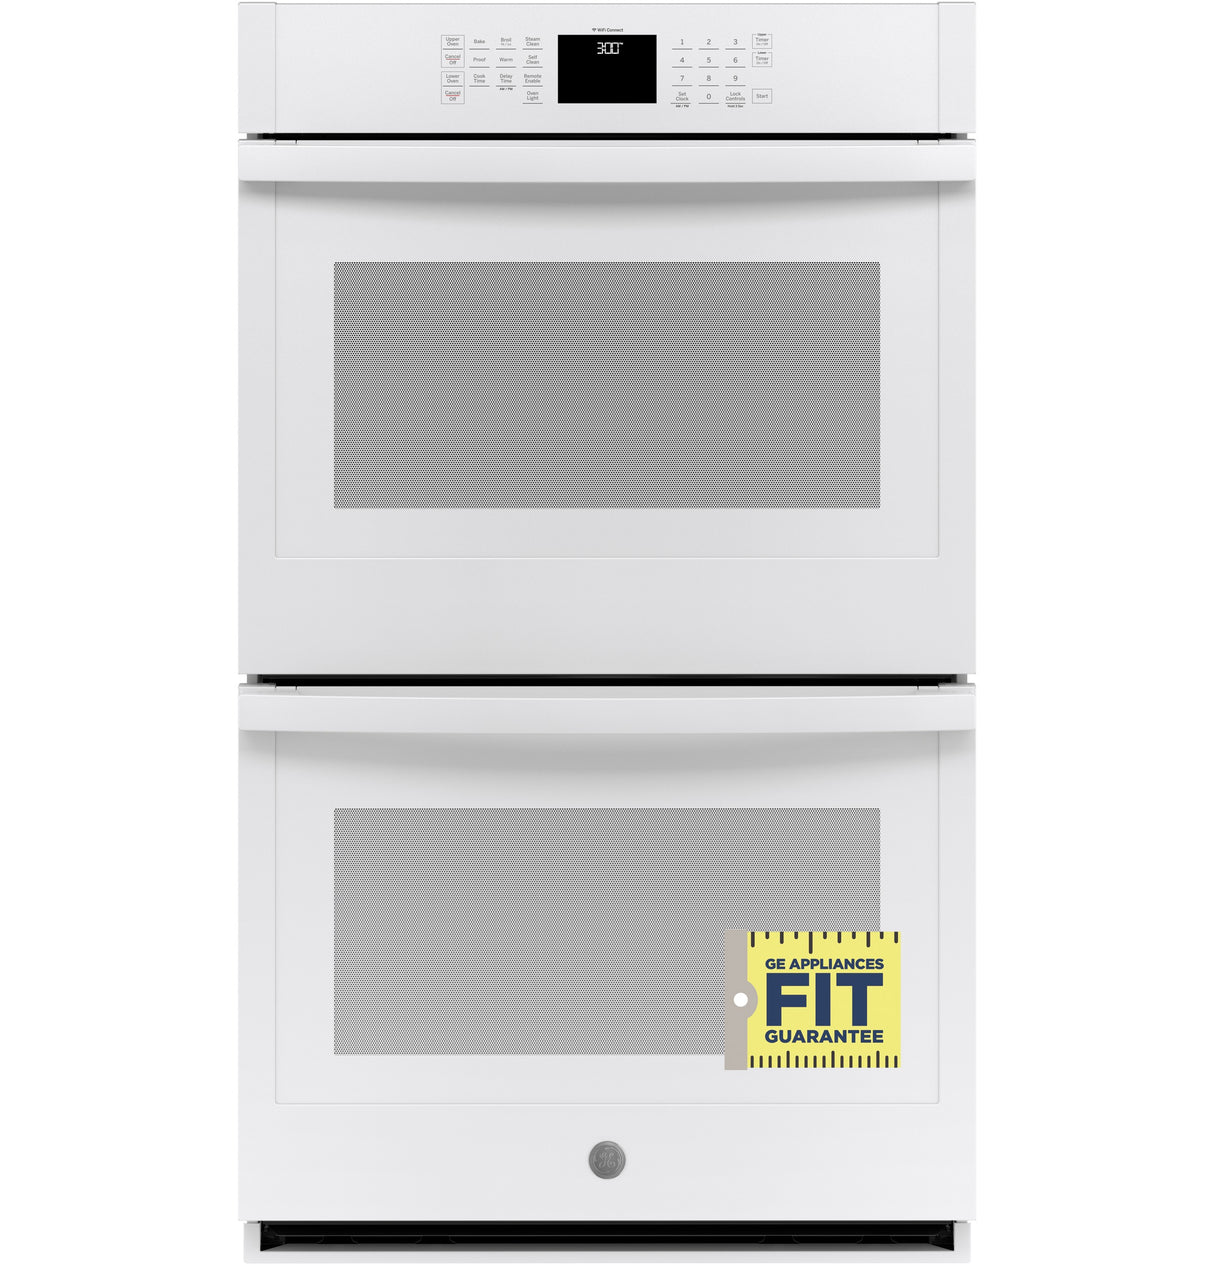 GE(R) 30" Smart Built-In Self-Clean Double Wall Oven with Never-Scrub Racks - (JTD3000DNWW)